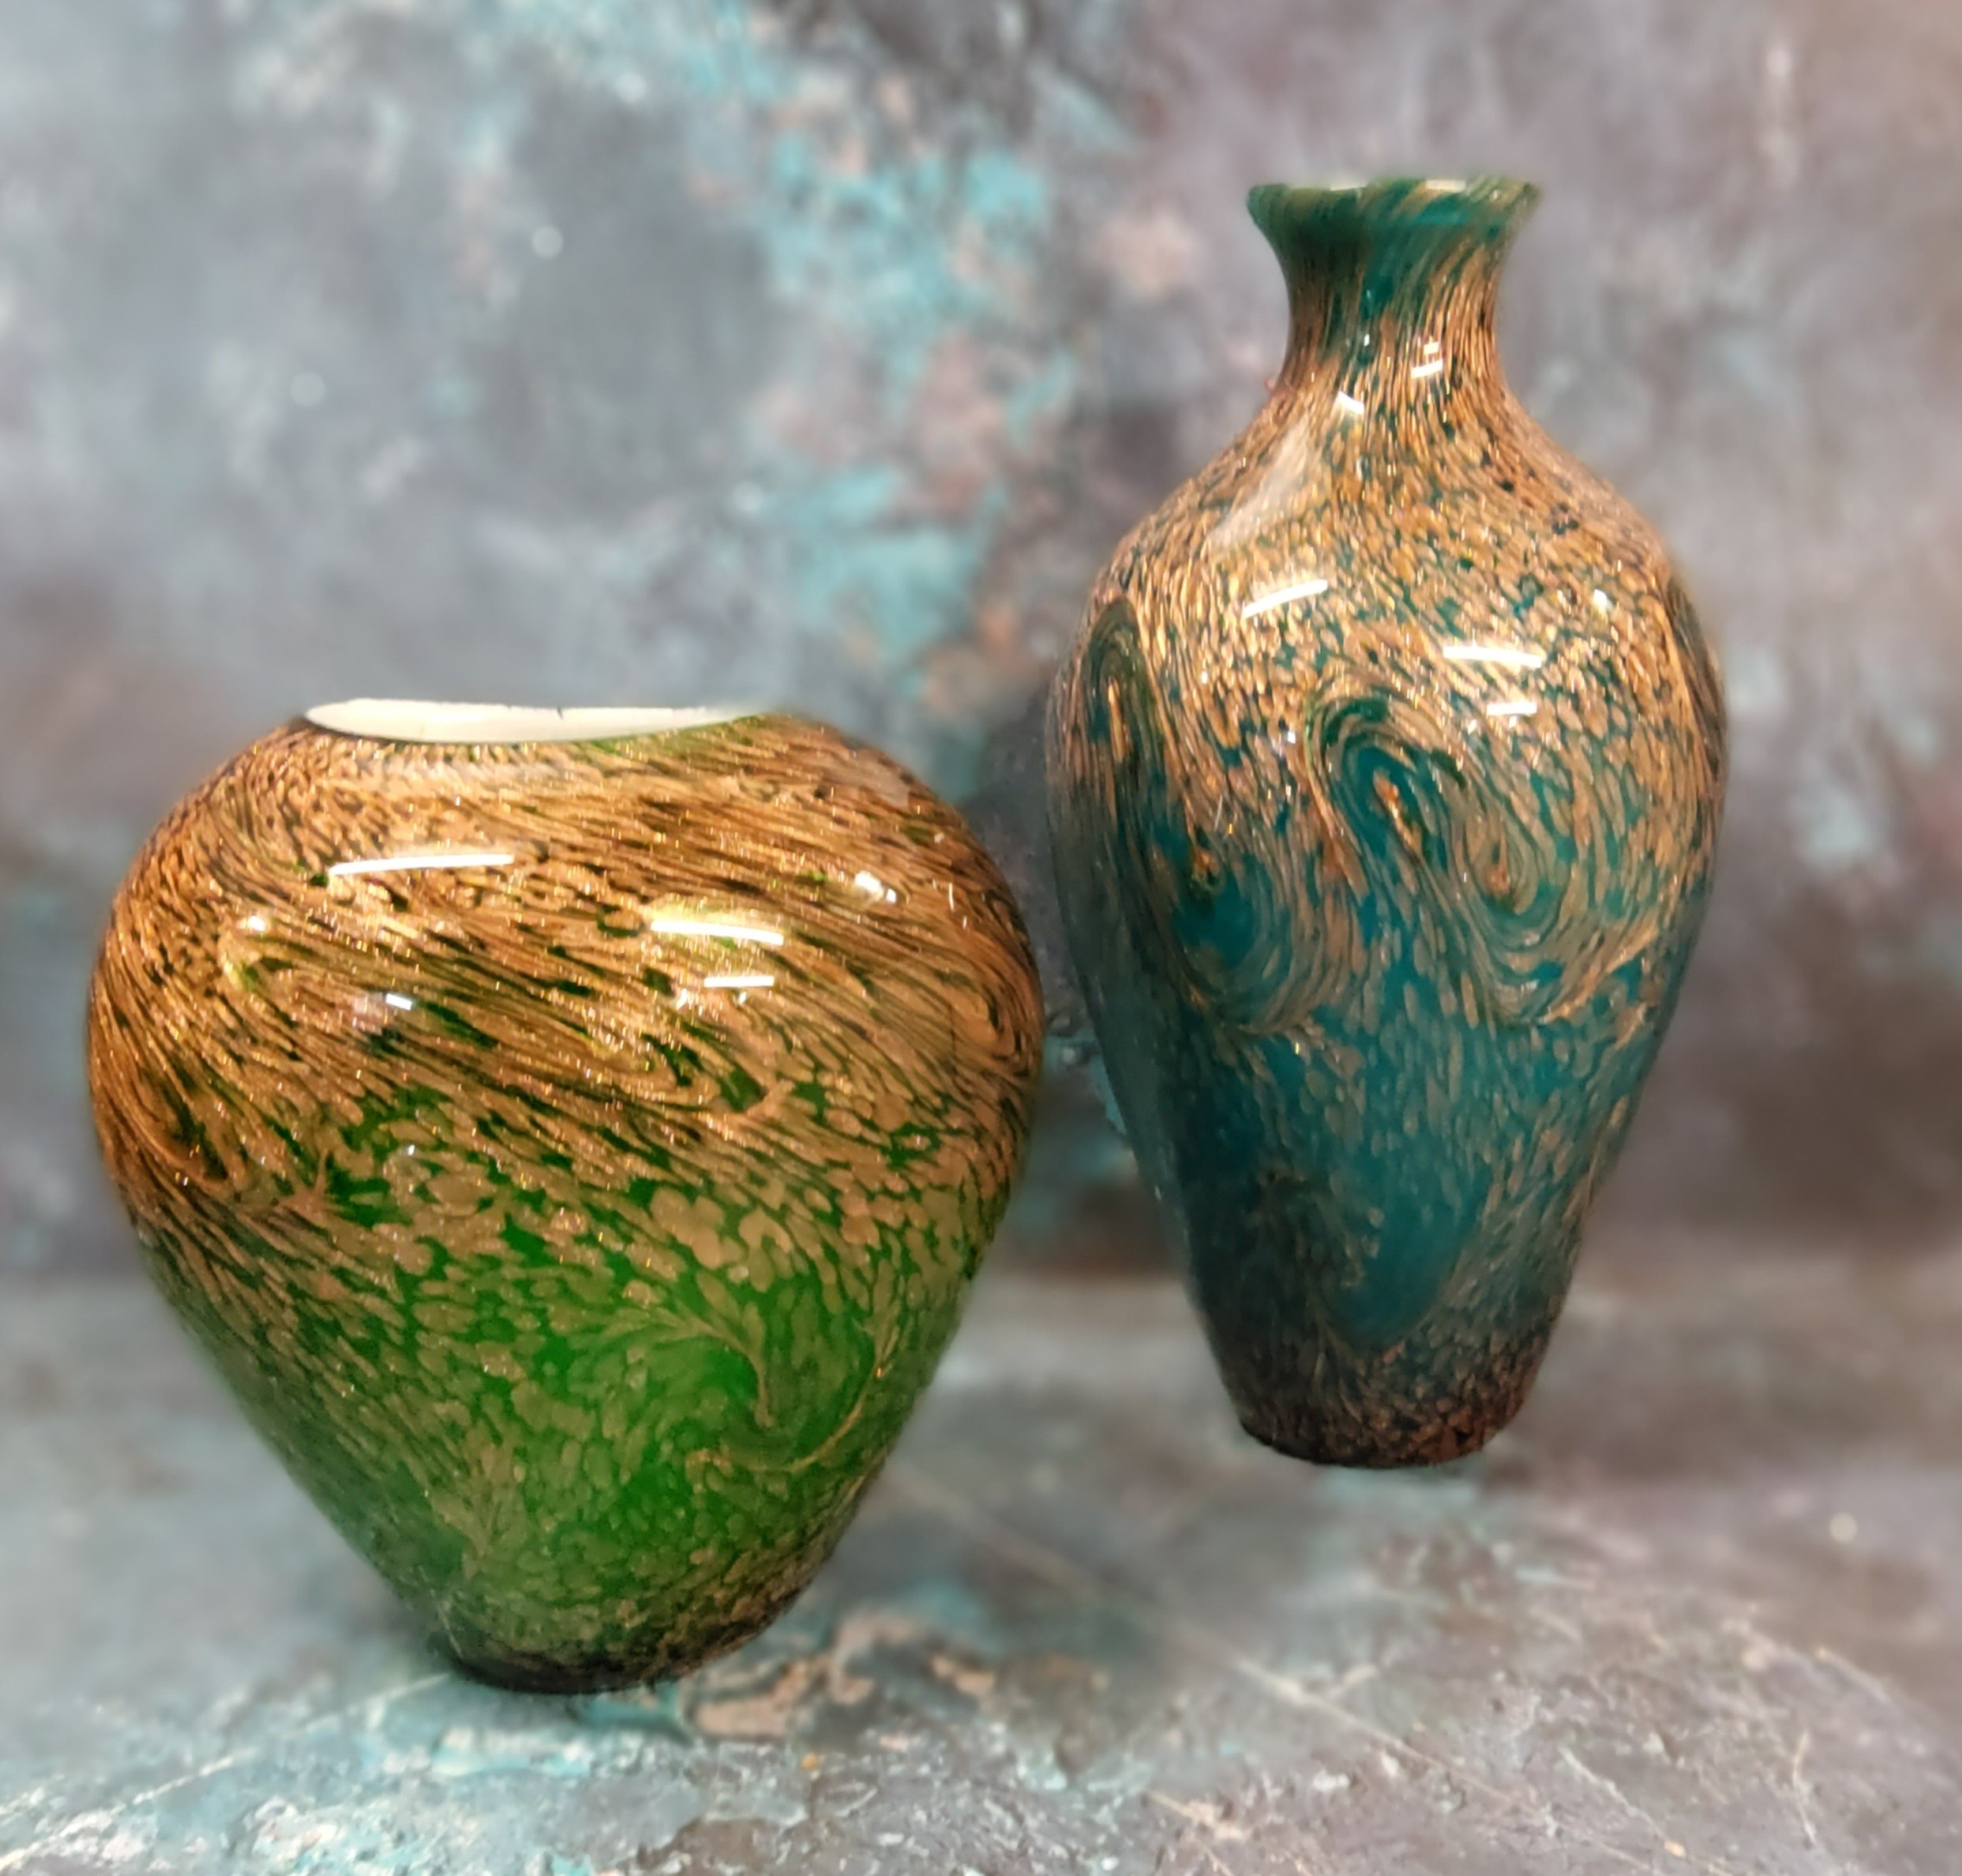 A mid 20th century Northern European glass ovoid vase, swirled with copper metallic lustre, 29cm